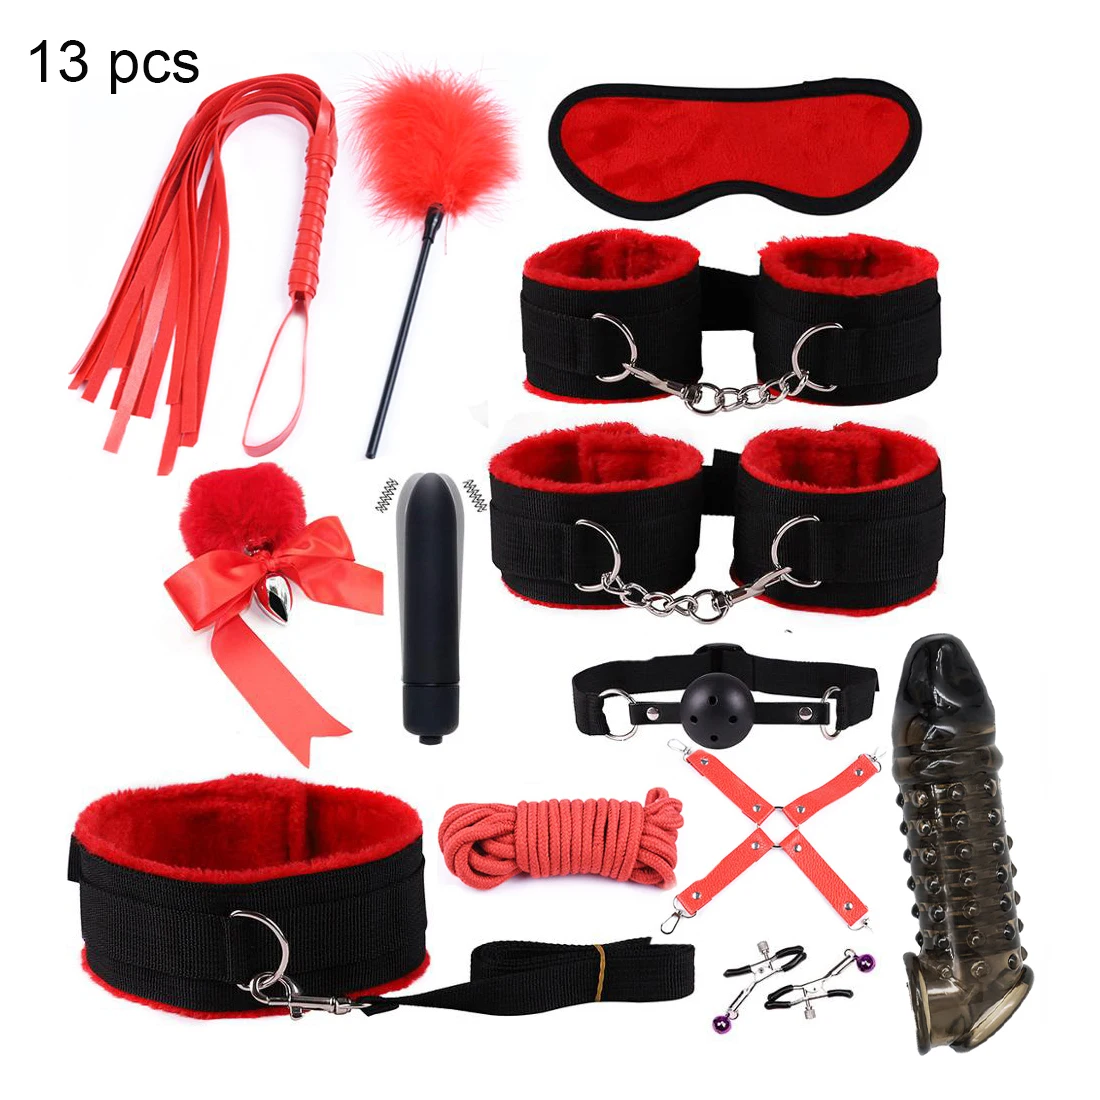 House Home Ay Leather A Kits Plush A A Set HandA A Games Whip Gag A Clamps s For - £32.77 GBP